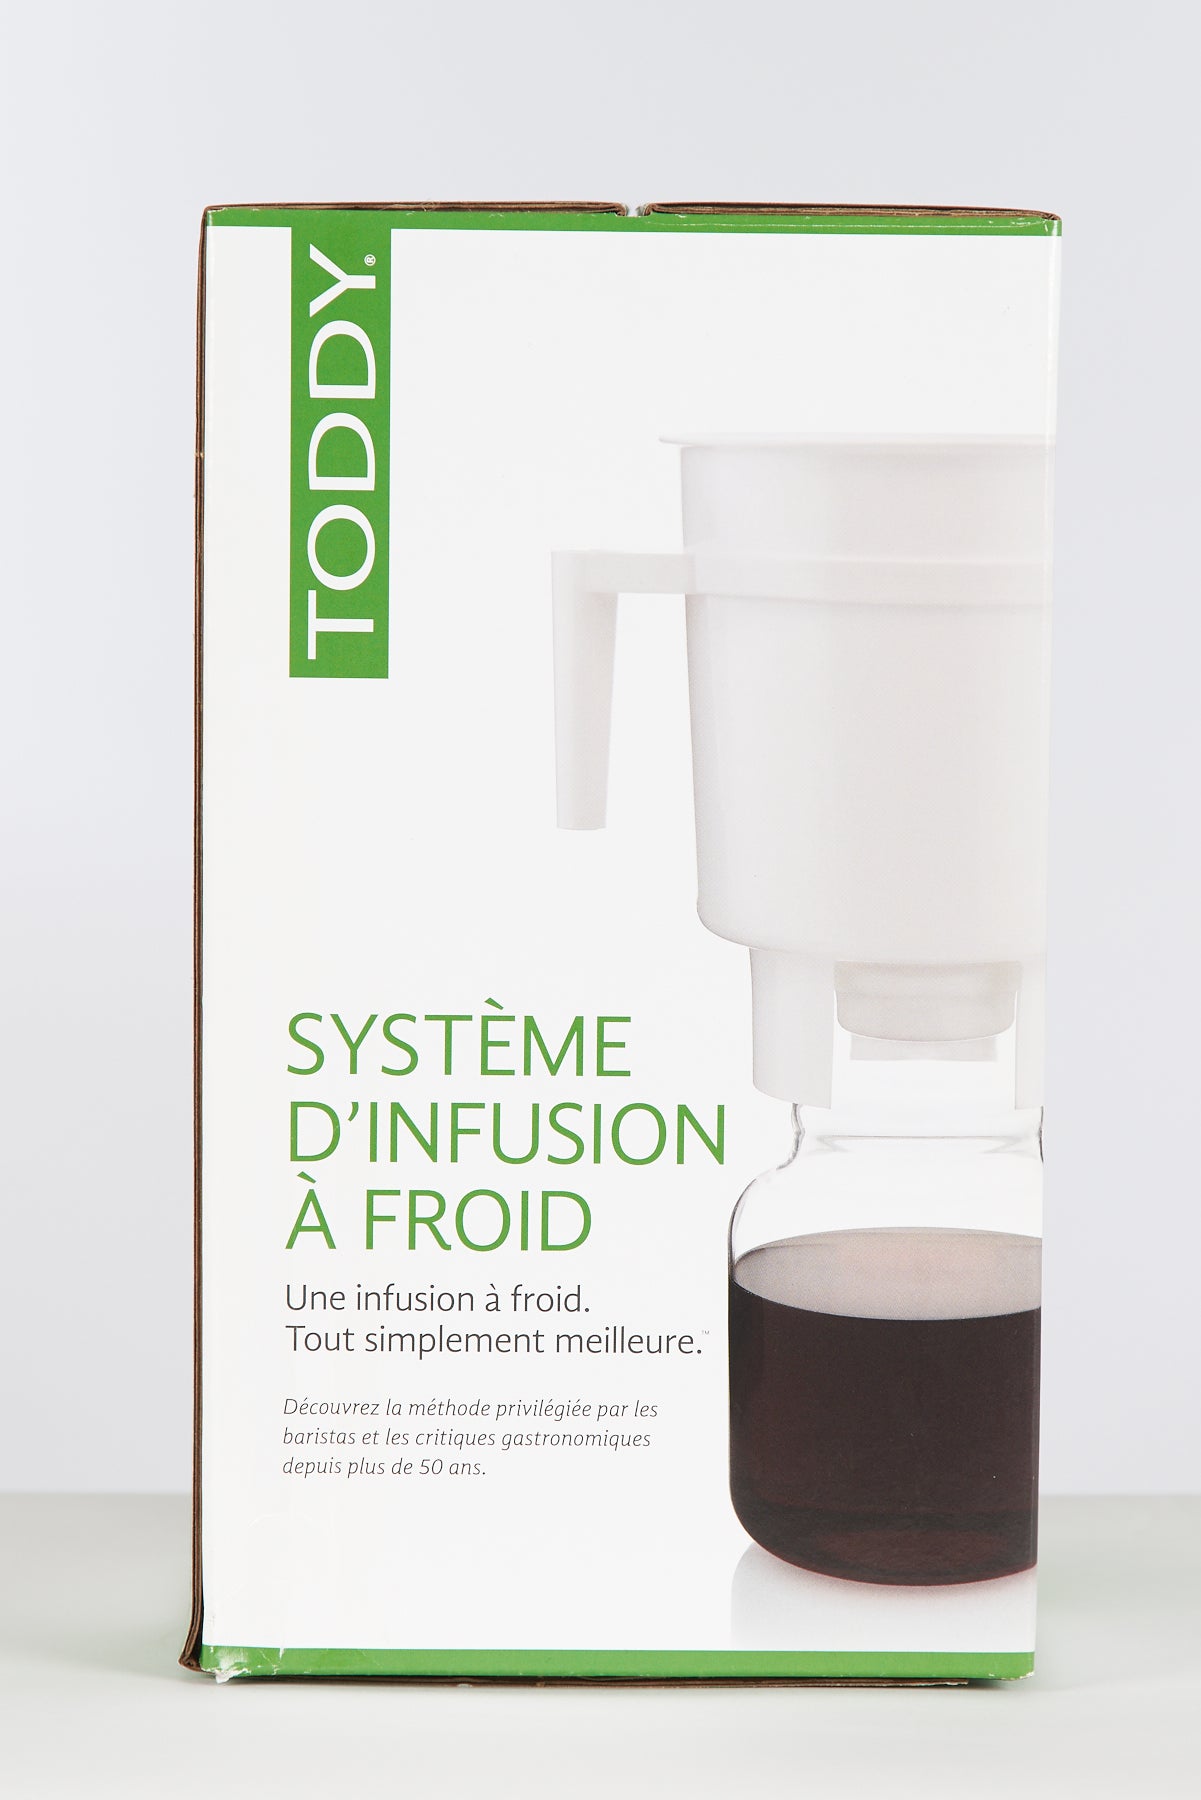 Instant 12 Cup Infusion Brew Plus Coffee Maker